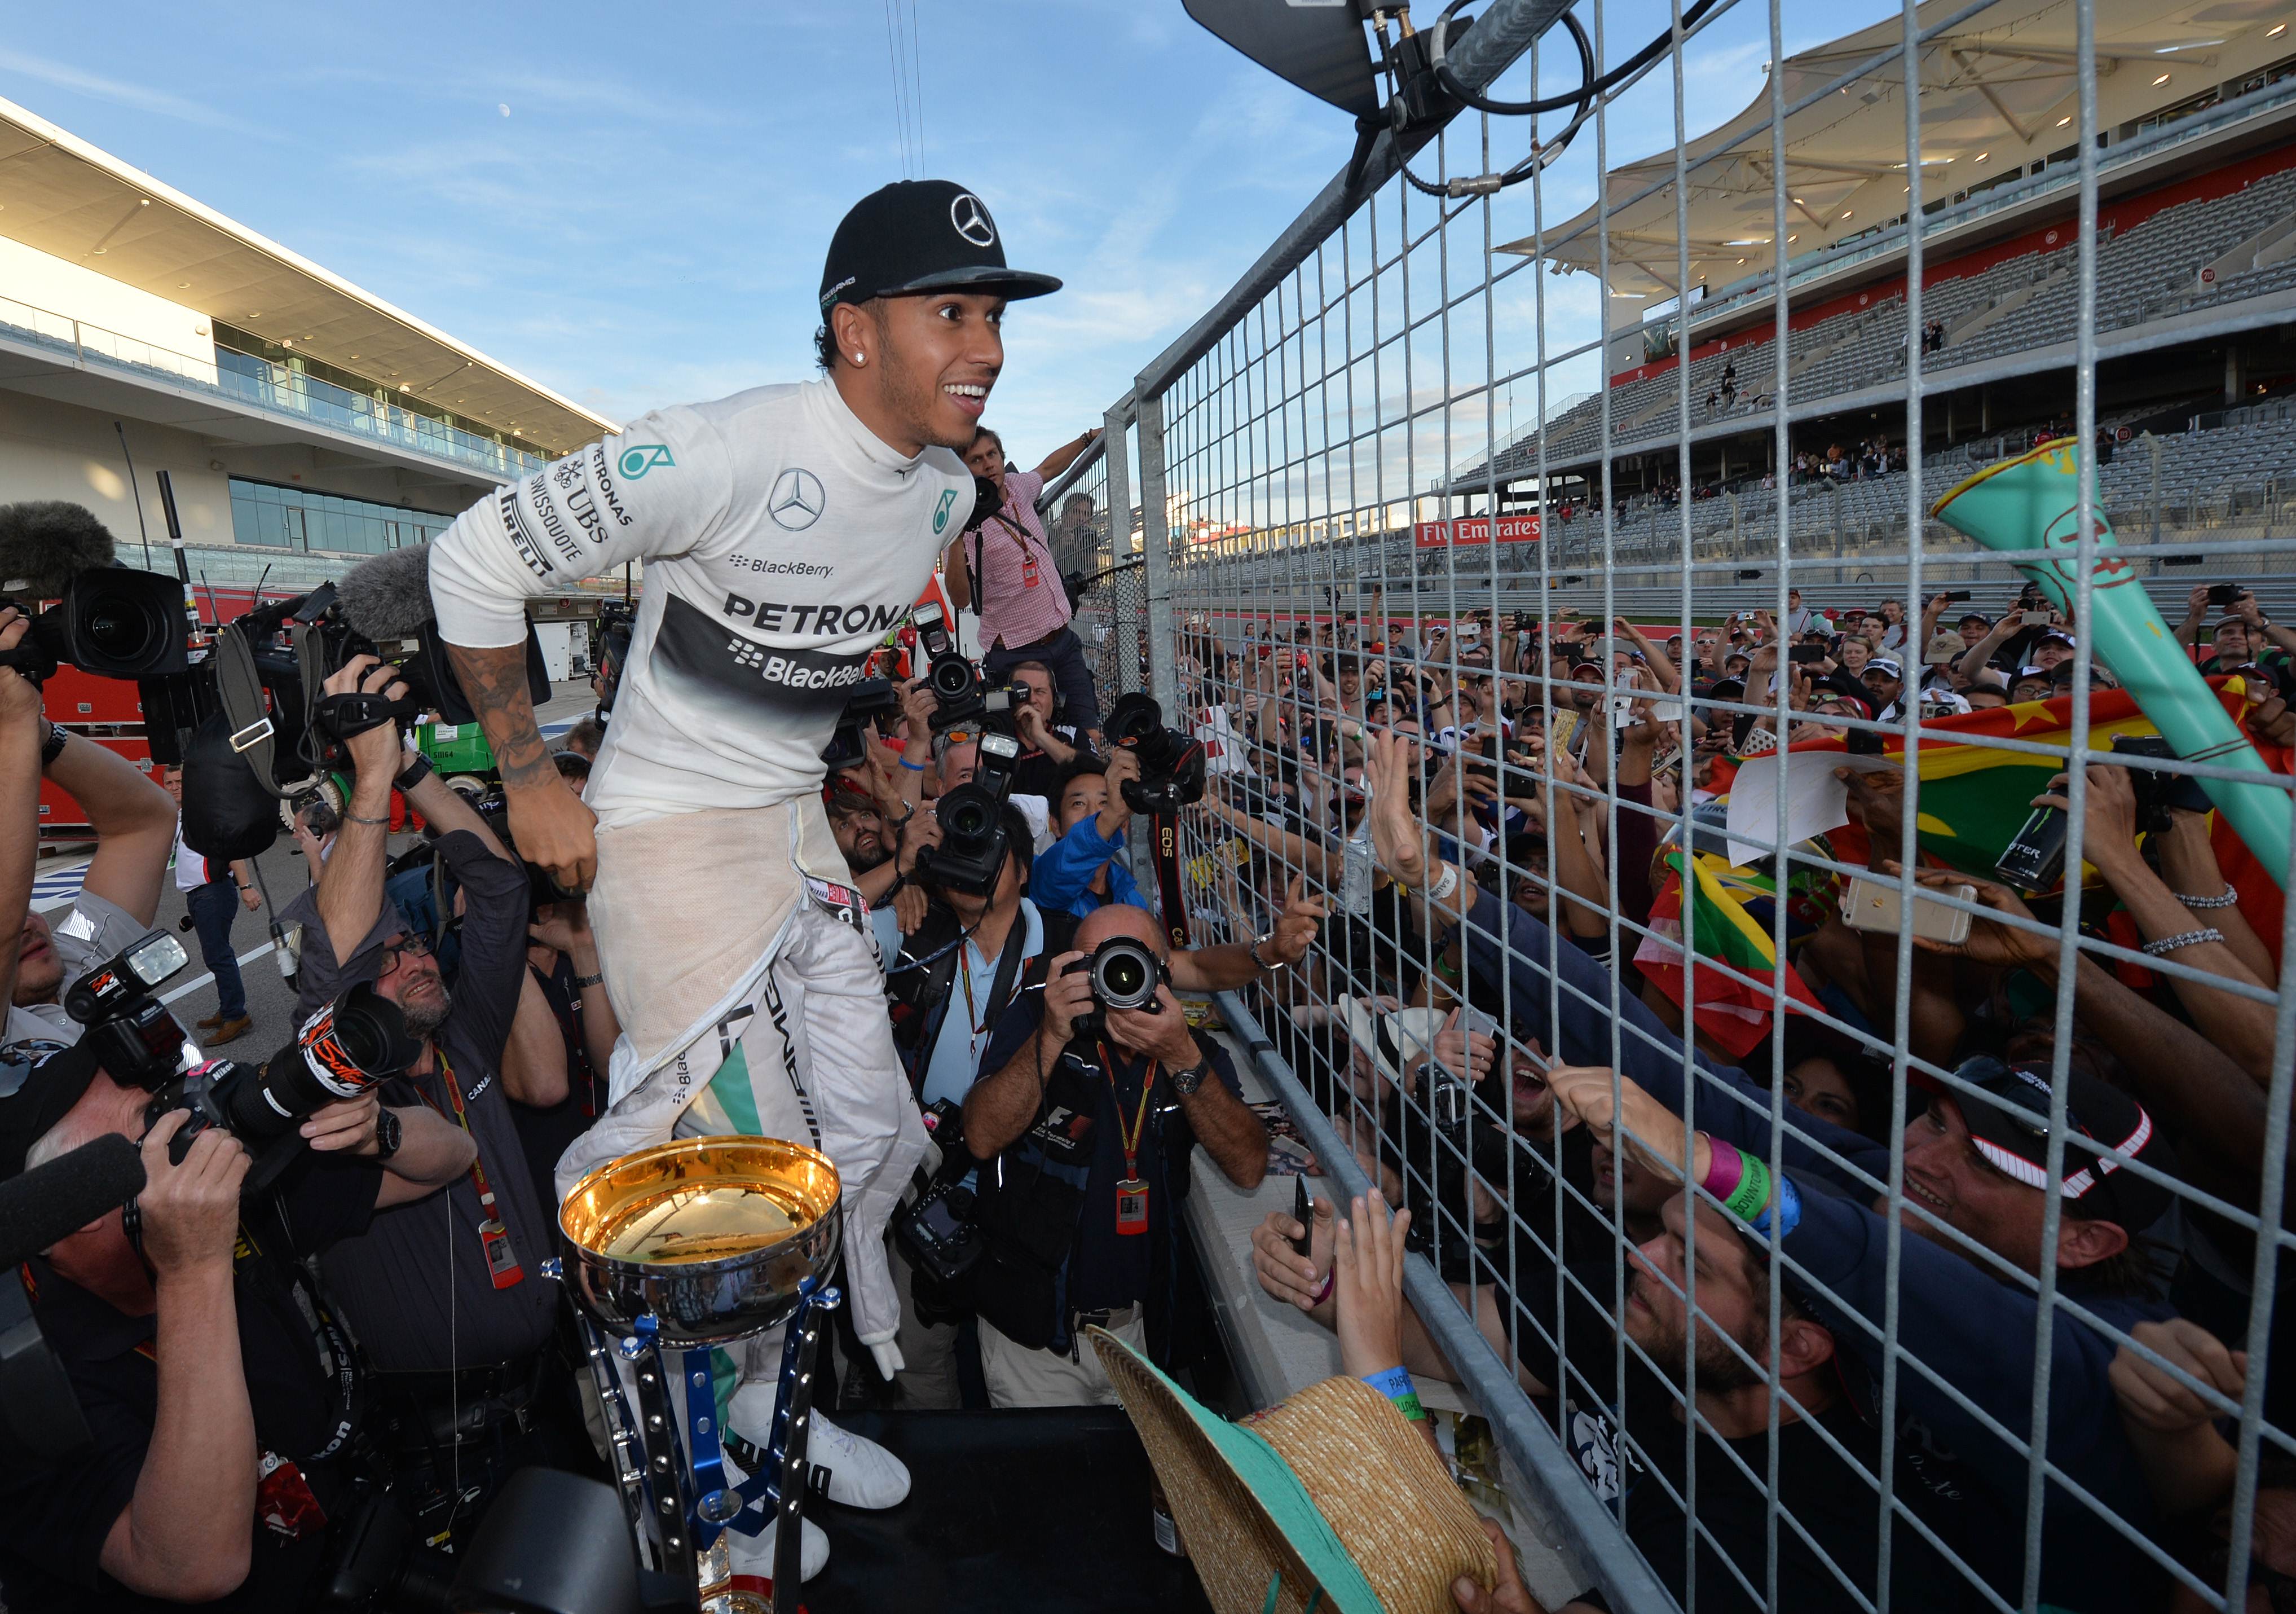 Lewis Hamilton enjoyed a lot of support among the Austin, Texas crowd in the United States claiming, "It was almost like racing in the UK." Photo: AFP